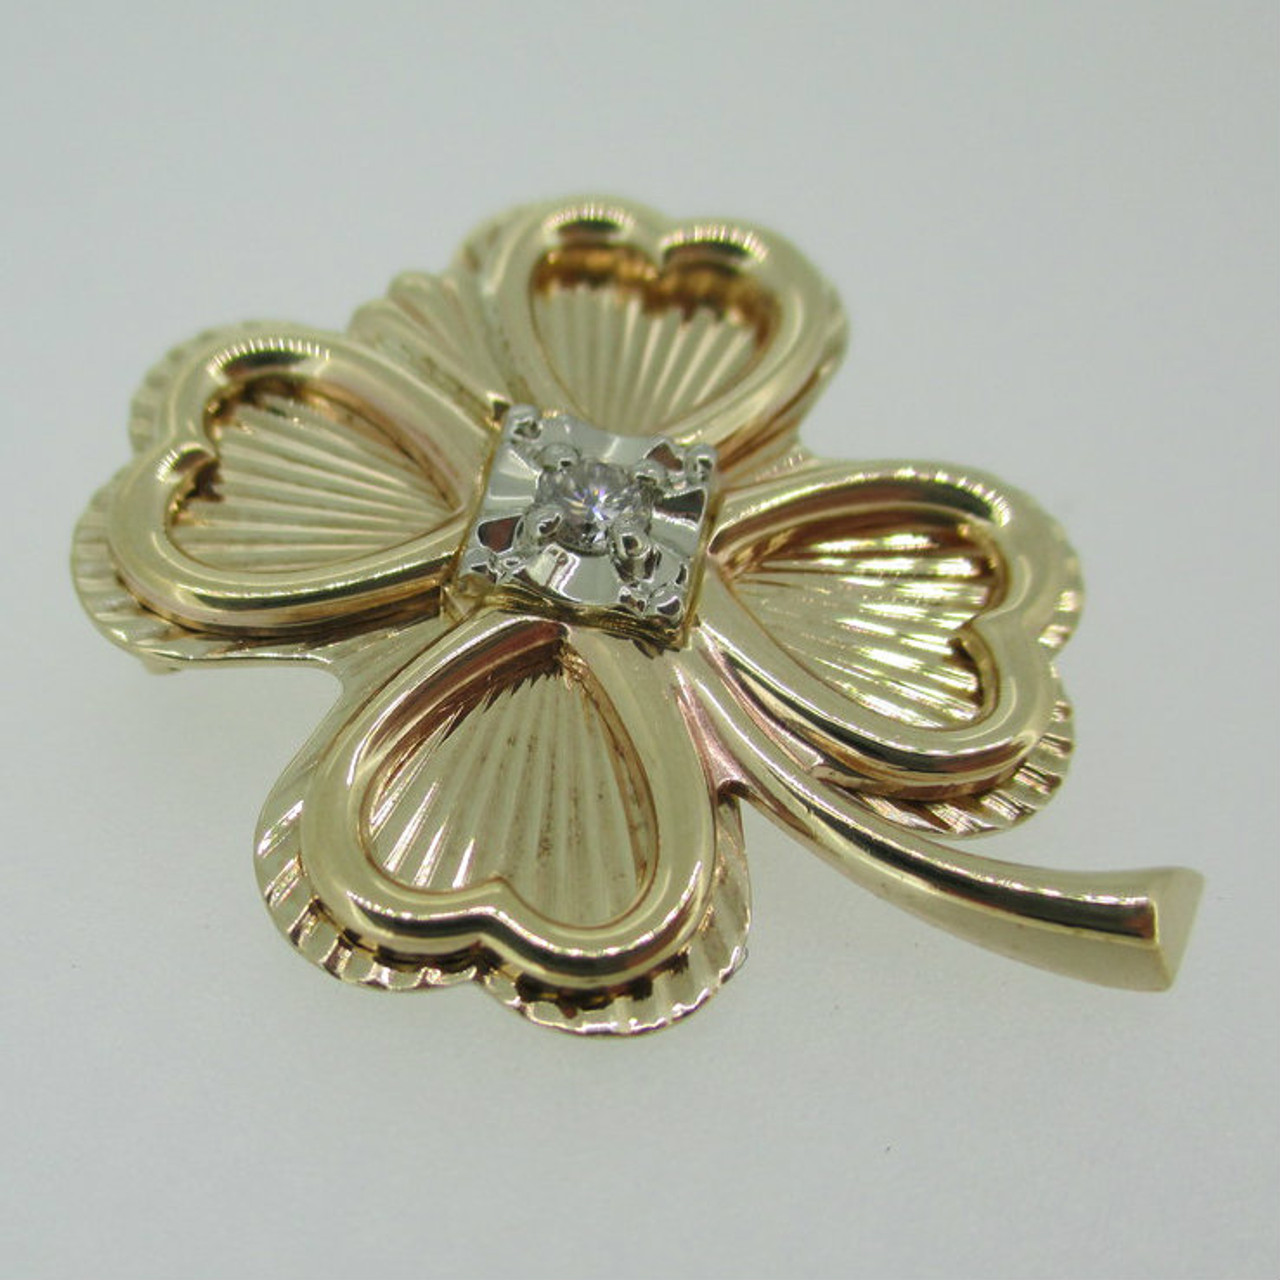 10k Yellow Gold Four Leaf Clover Pin Brooch with Diamond Accent